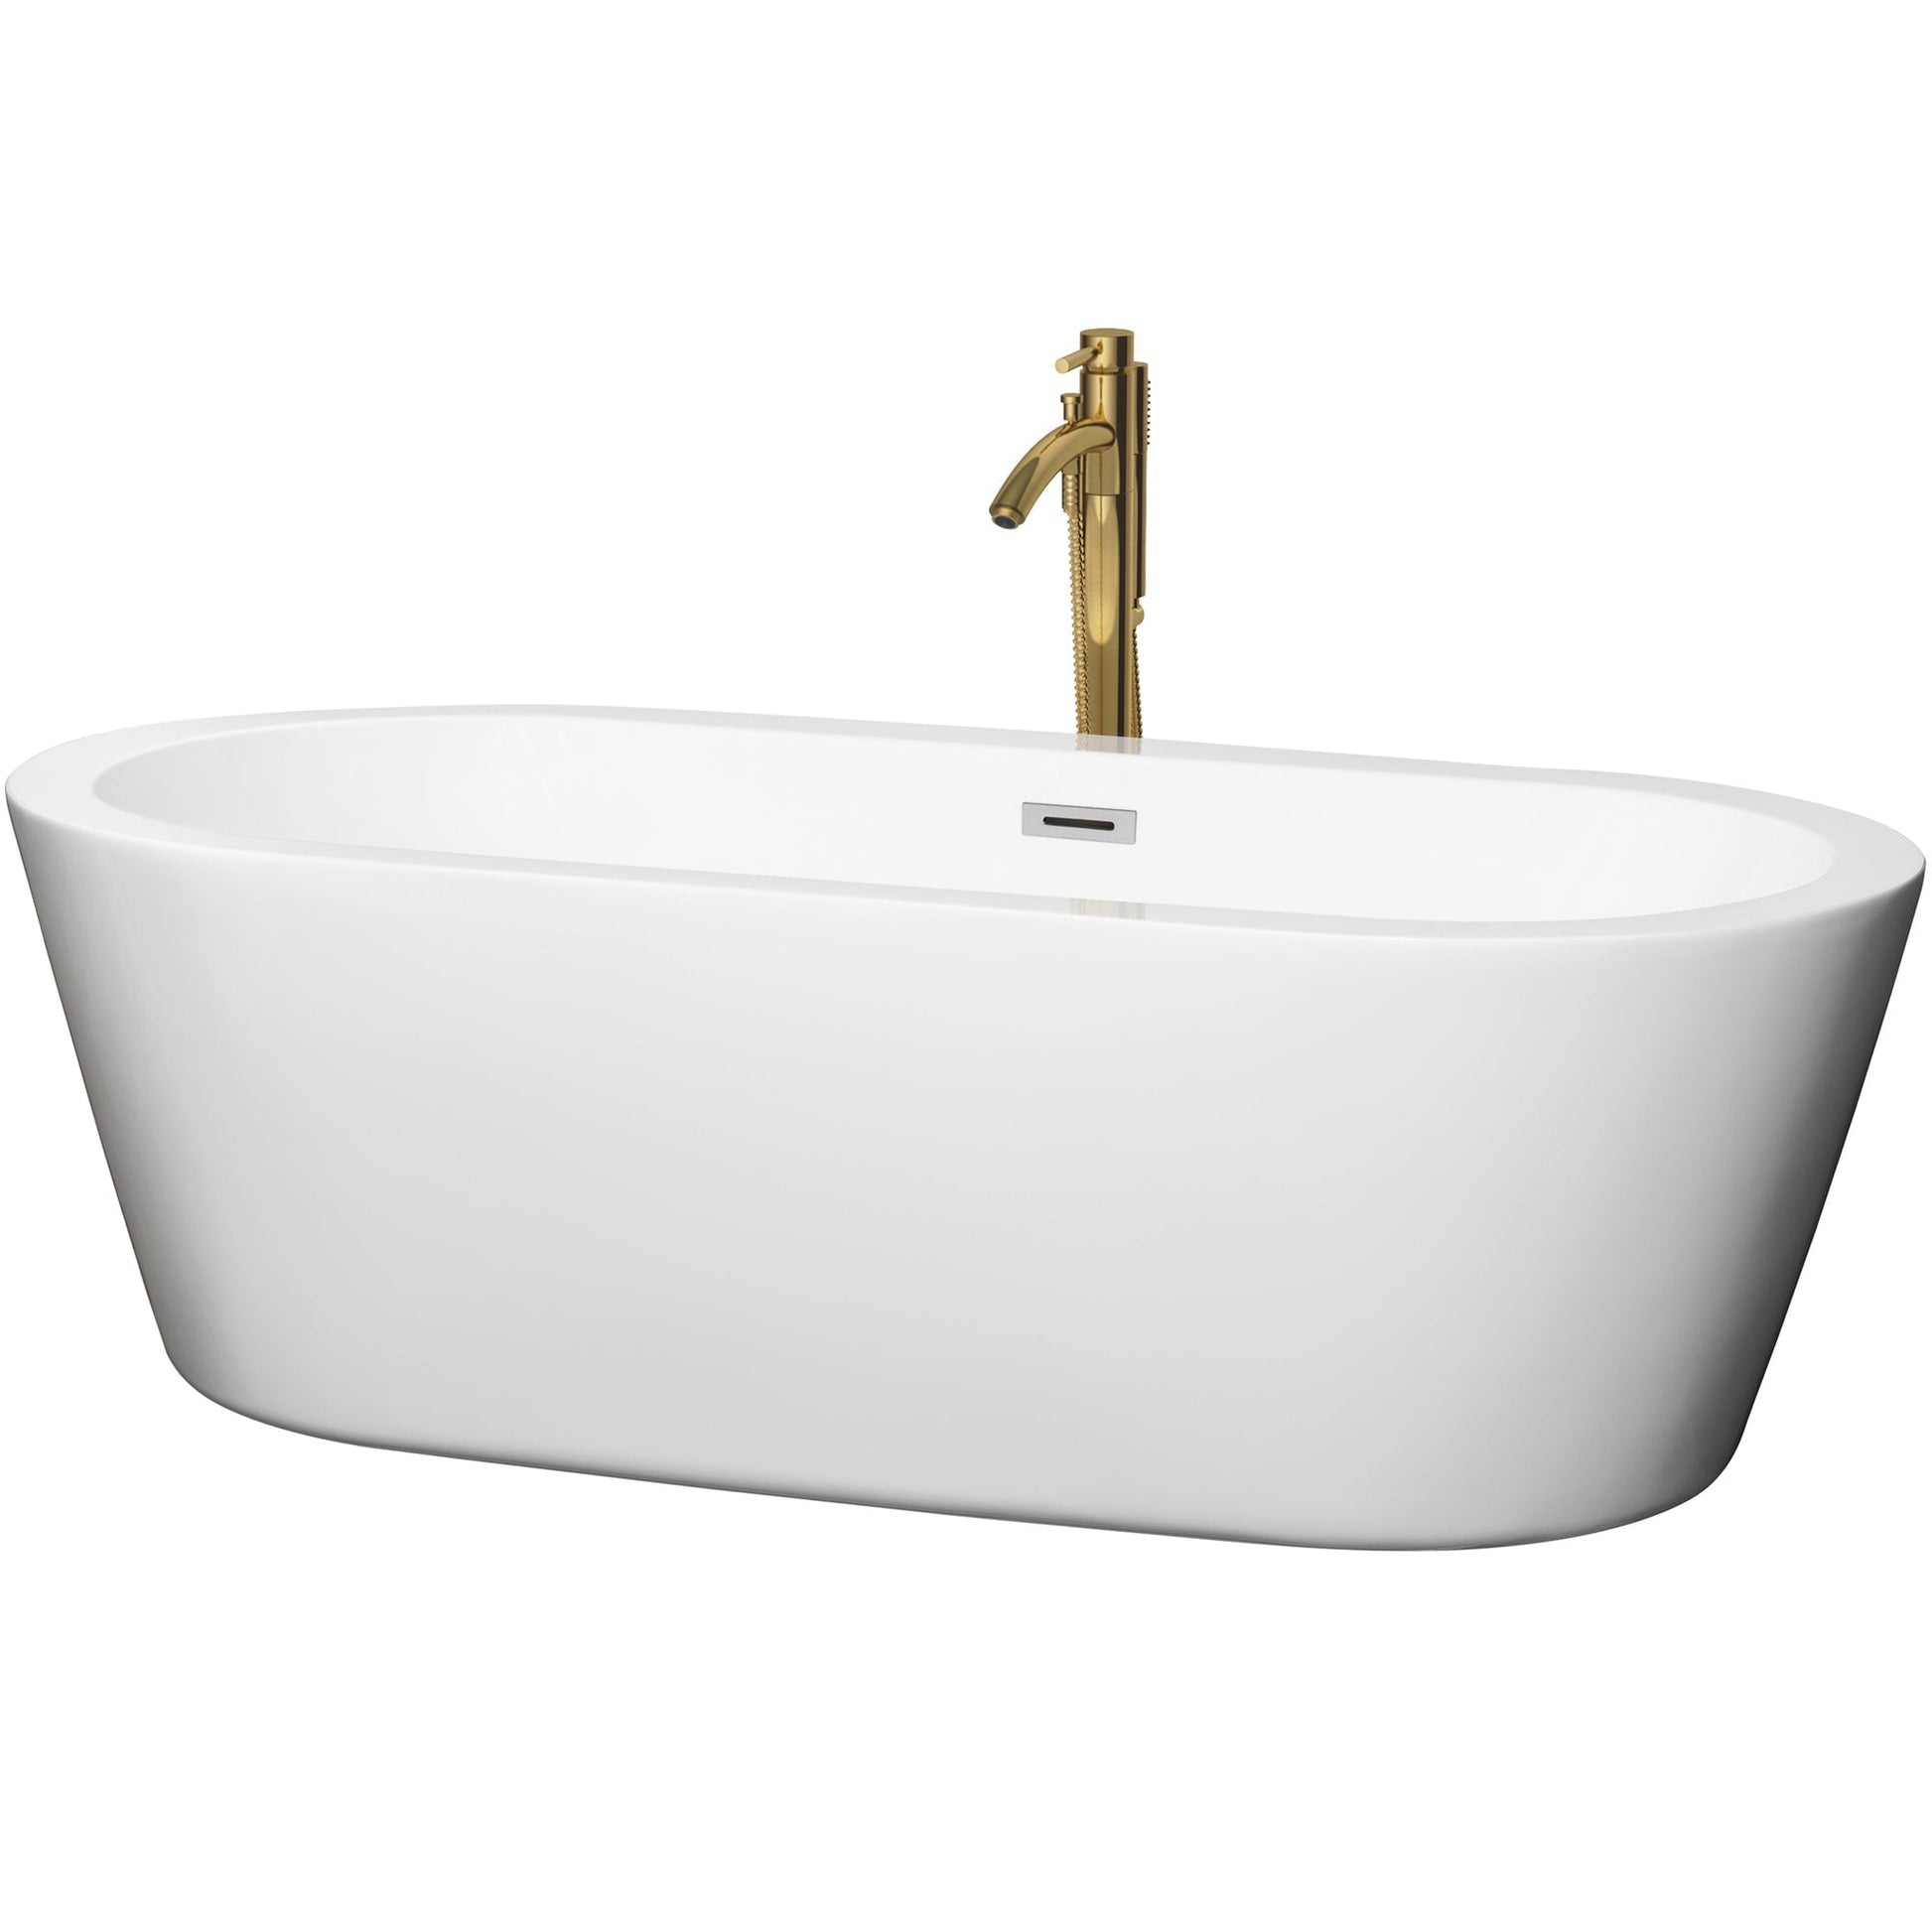 Wyndham Collection Mermaid 71" Freestanding Bathtub in White With Polished Chrome Trim and Floor Mounted Faucet in Brushed Gold